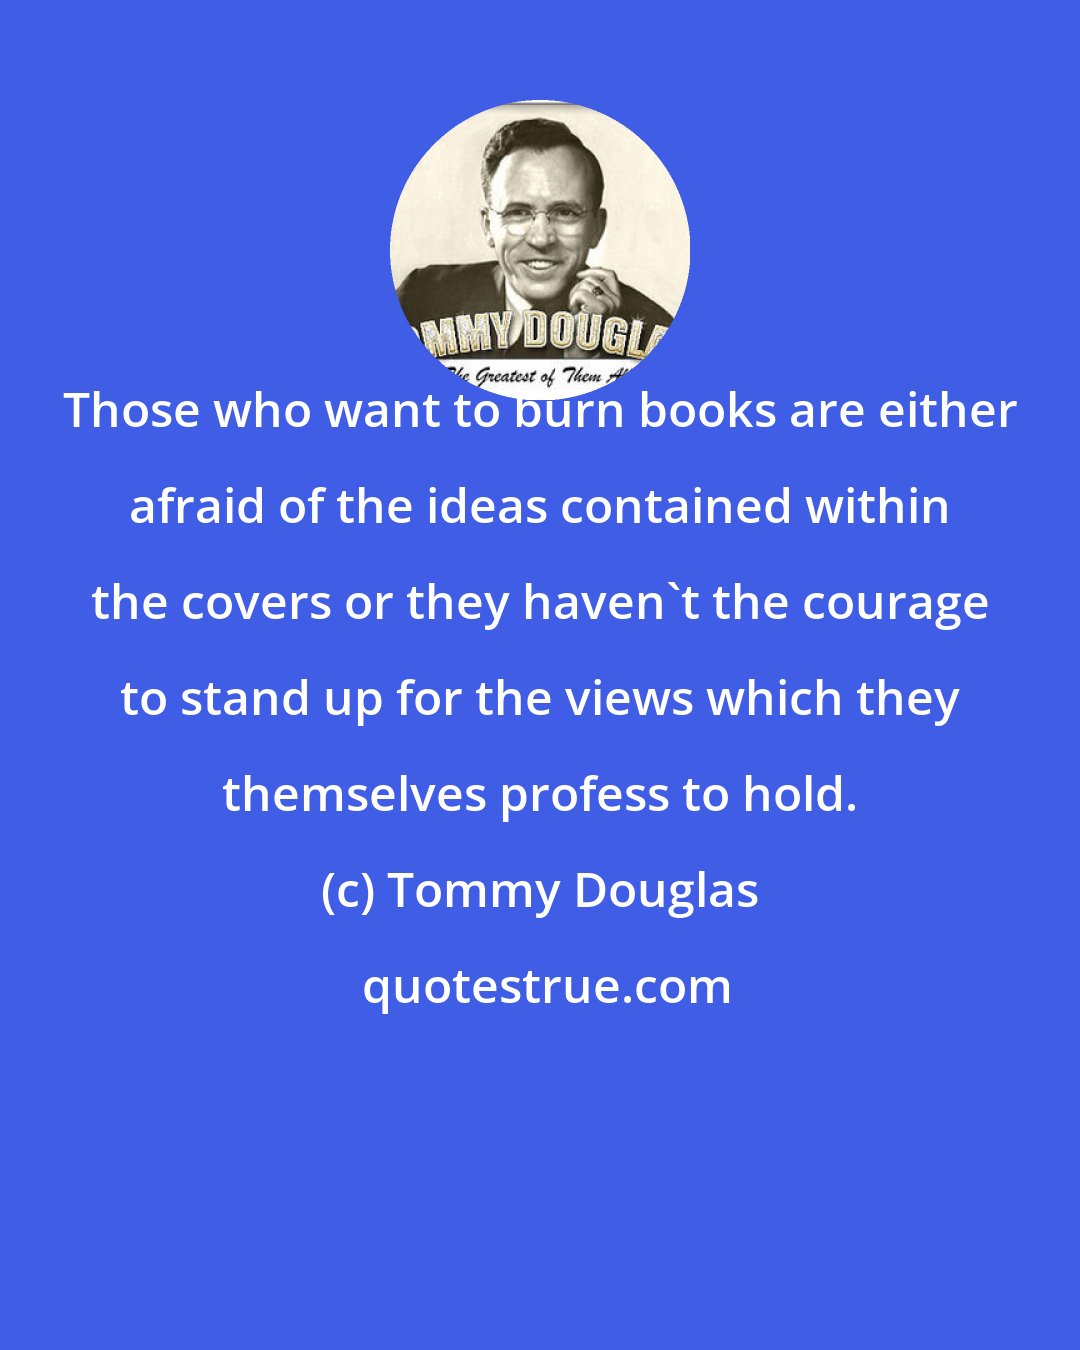 Tommy Douglas: Those who want to burn books are either afraid of the ideas contained within the covers or they haven't the courage to stand up for the views which they themselves profess to hold.